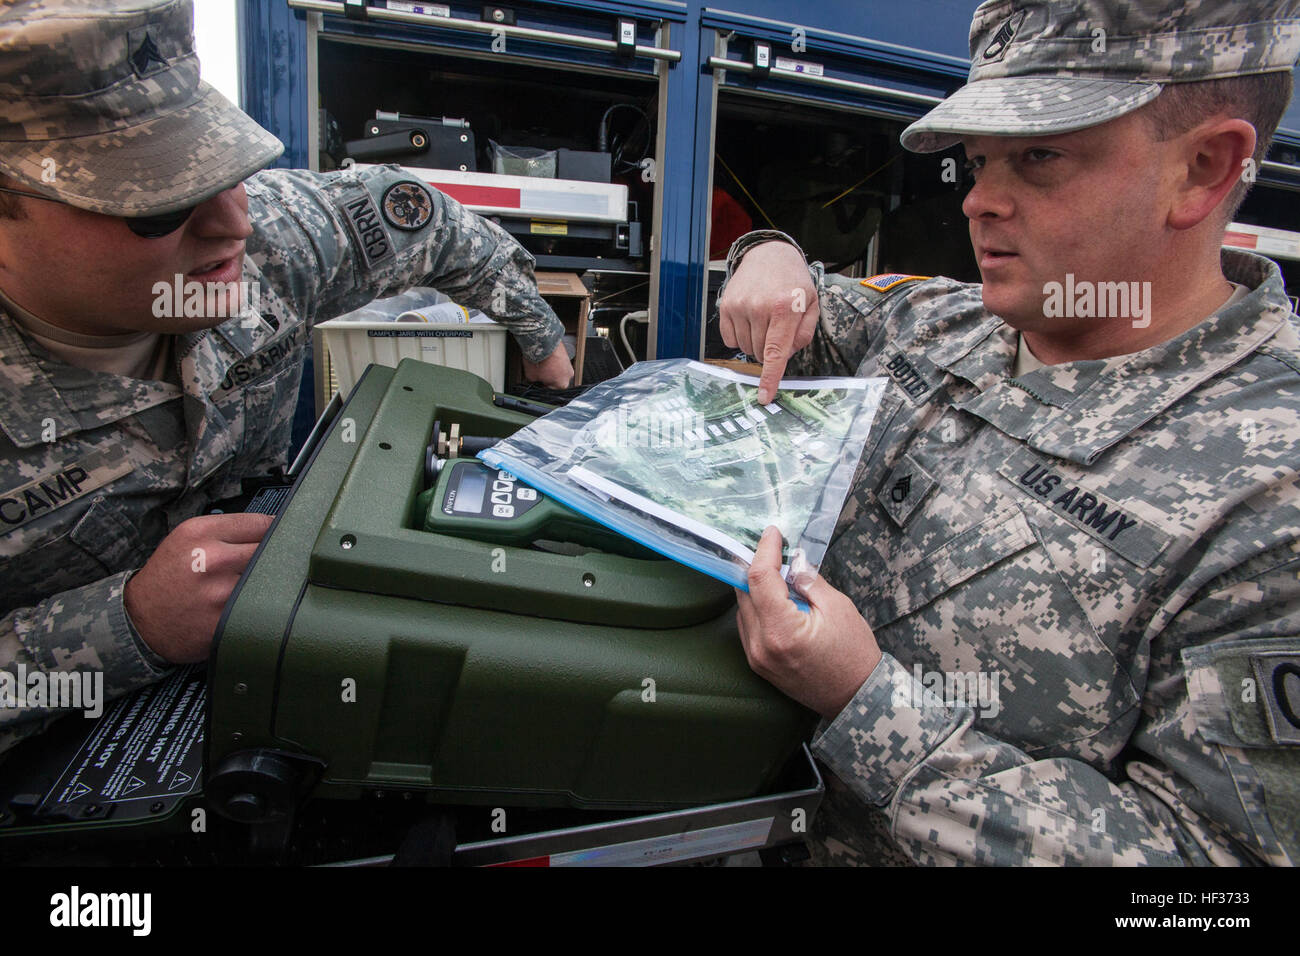 Sgt. William J. Camp Jr., left, and Staff Sgt. Brandon Bottley, both with the 21st Weapons of Mass Destruction Civil Support Team (WMD CST), New Jersey National Guard, examine a satellite photo of a weapons of mass destruction factory site during a full-scale Homeland Response Force exercise involving units from the New Jersey and New York Army and Air National Guard at Joint Base McGuire-Dix-Lakehurst, N.J., April 16, 2015. The Chemical, Biological, Radiological and Nuclear (CBRN) portion of the exercise was performed by National Guard Soldiers and Airmen from New Jersey’s 21st Weapons of Mas Stock Photo